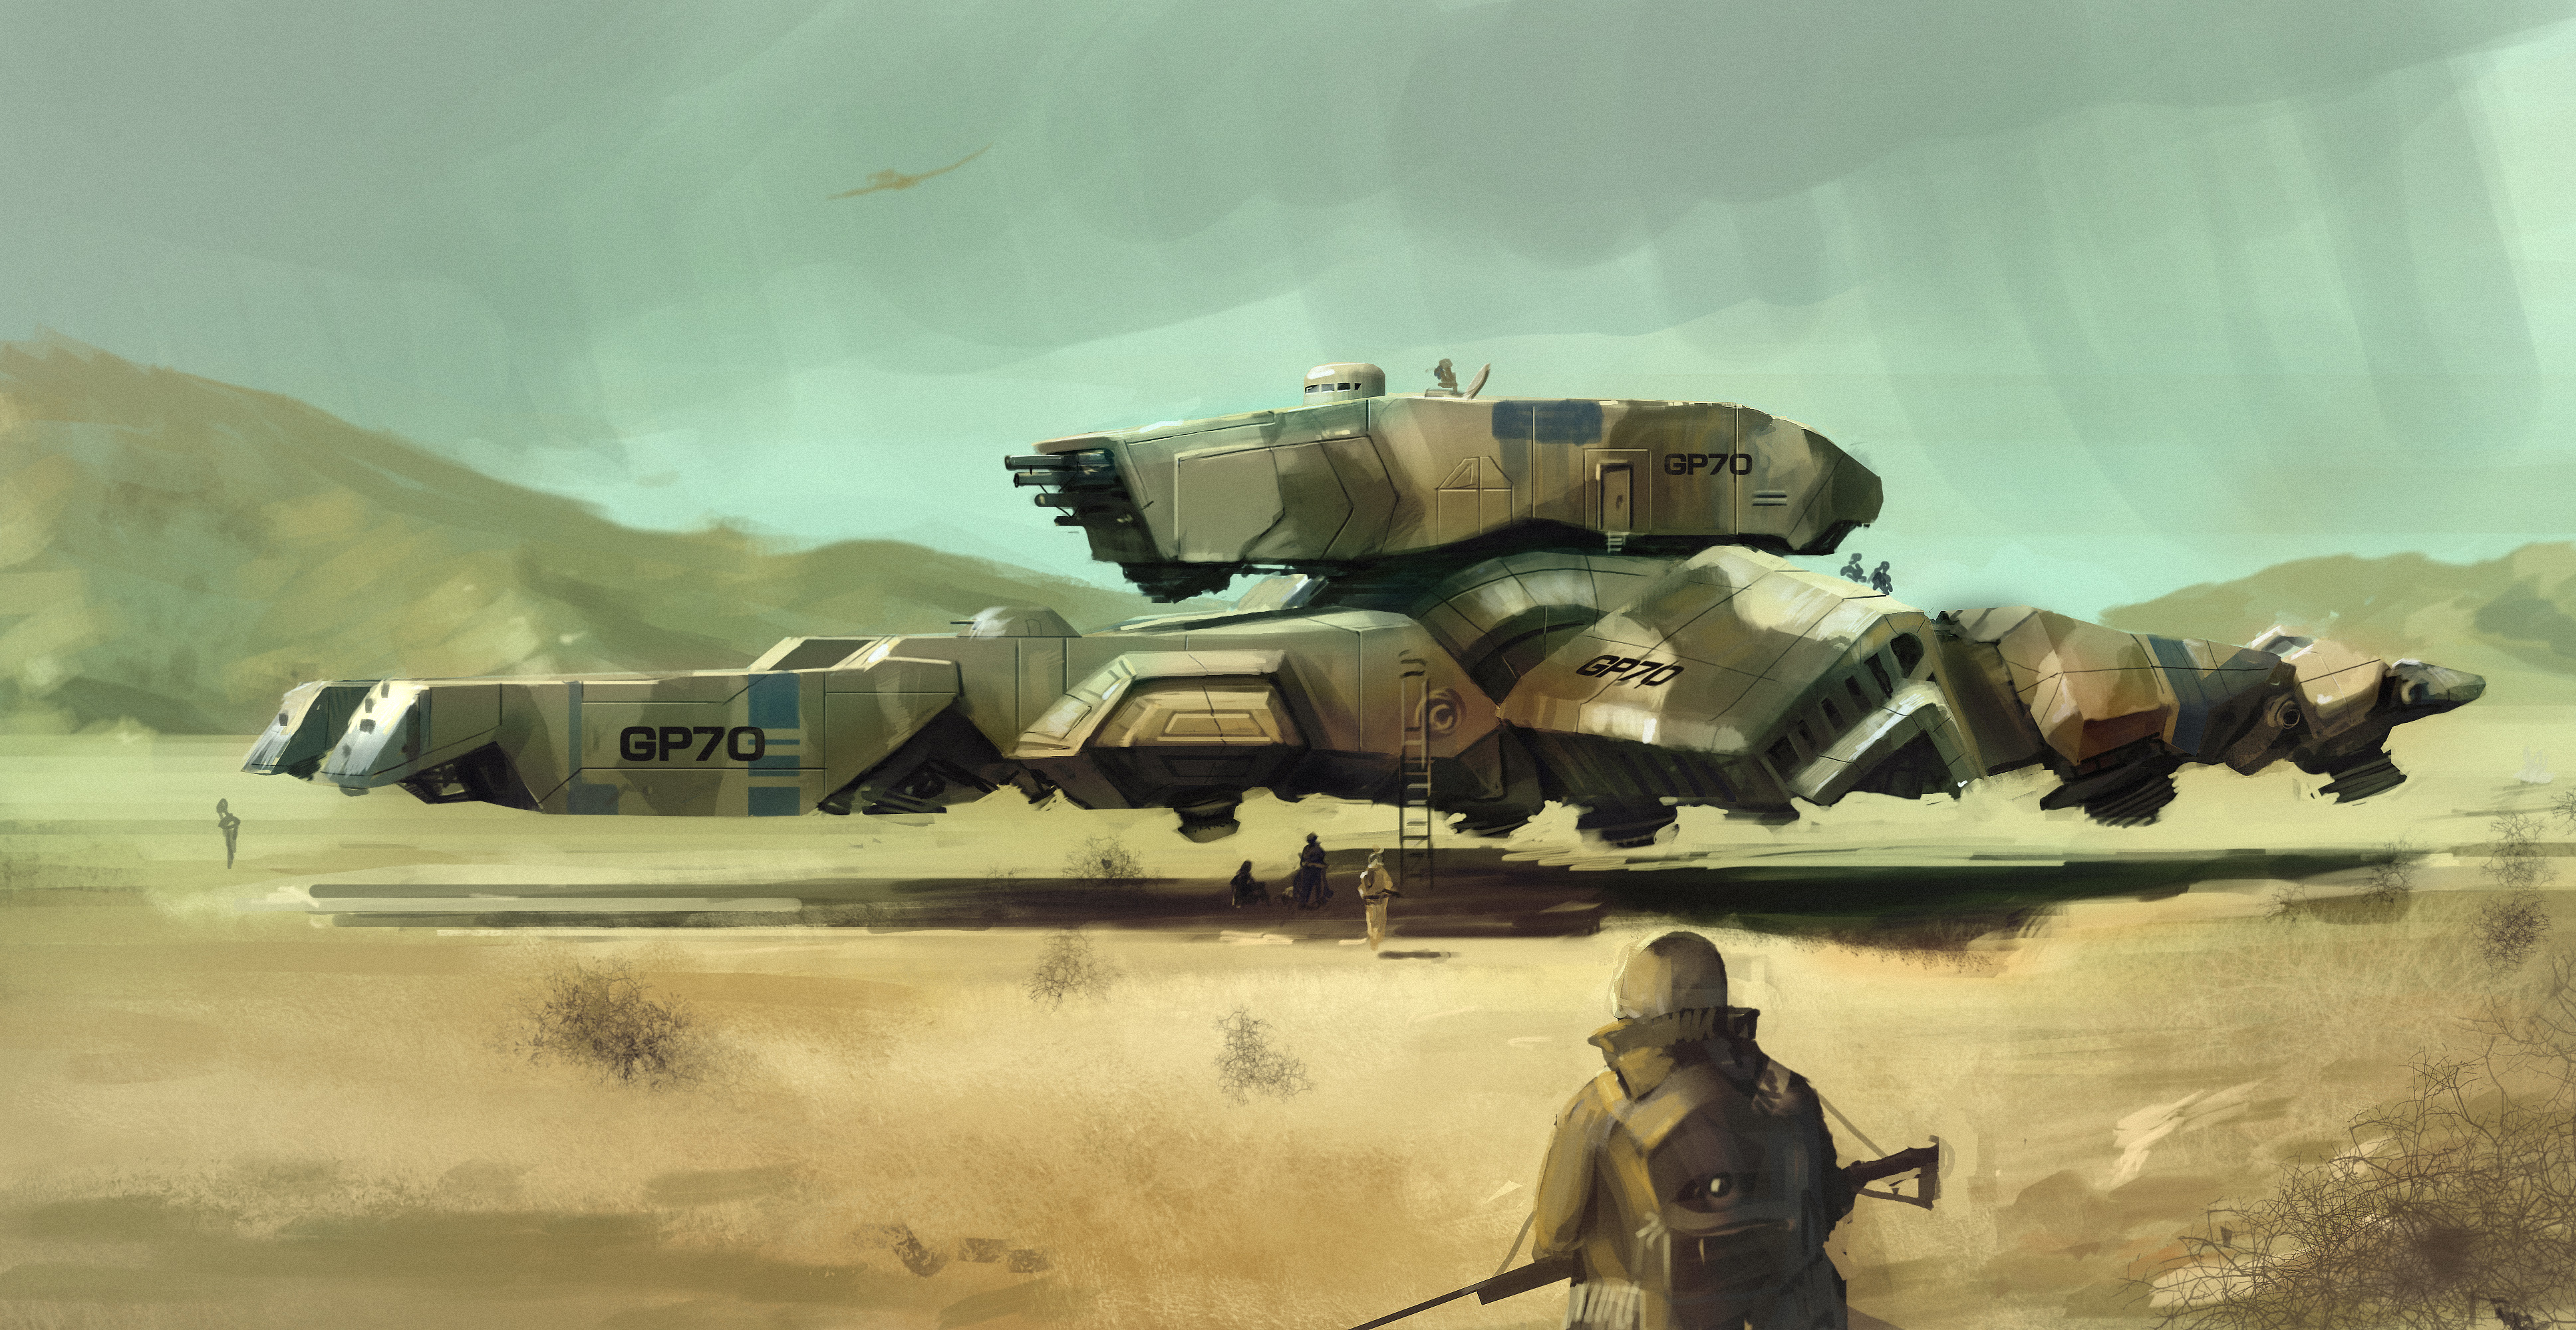 Sci-fi military wallpaper by J-Humphries with futuristic elements and intense action.